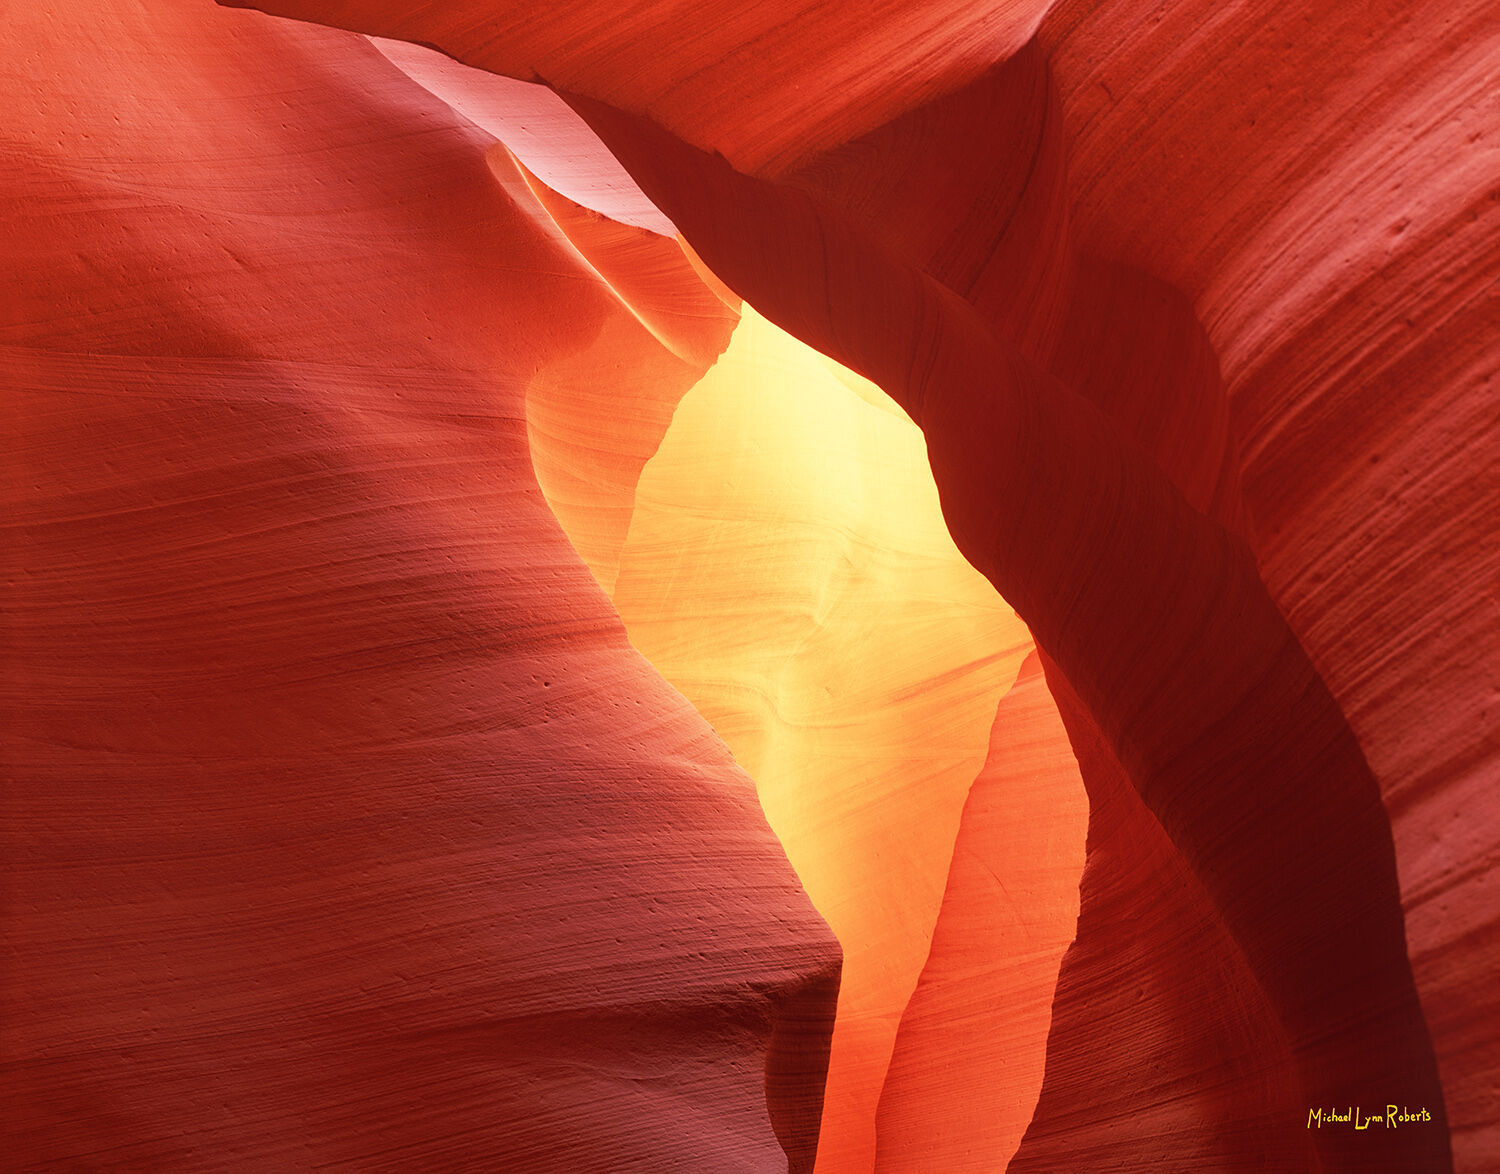 I titled this photograph "Elusive Beauty" because the light on the background canyon wall only appears for a week or two on either...